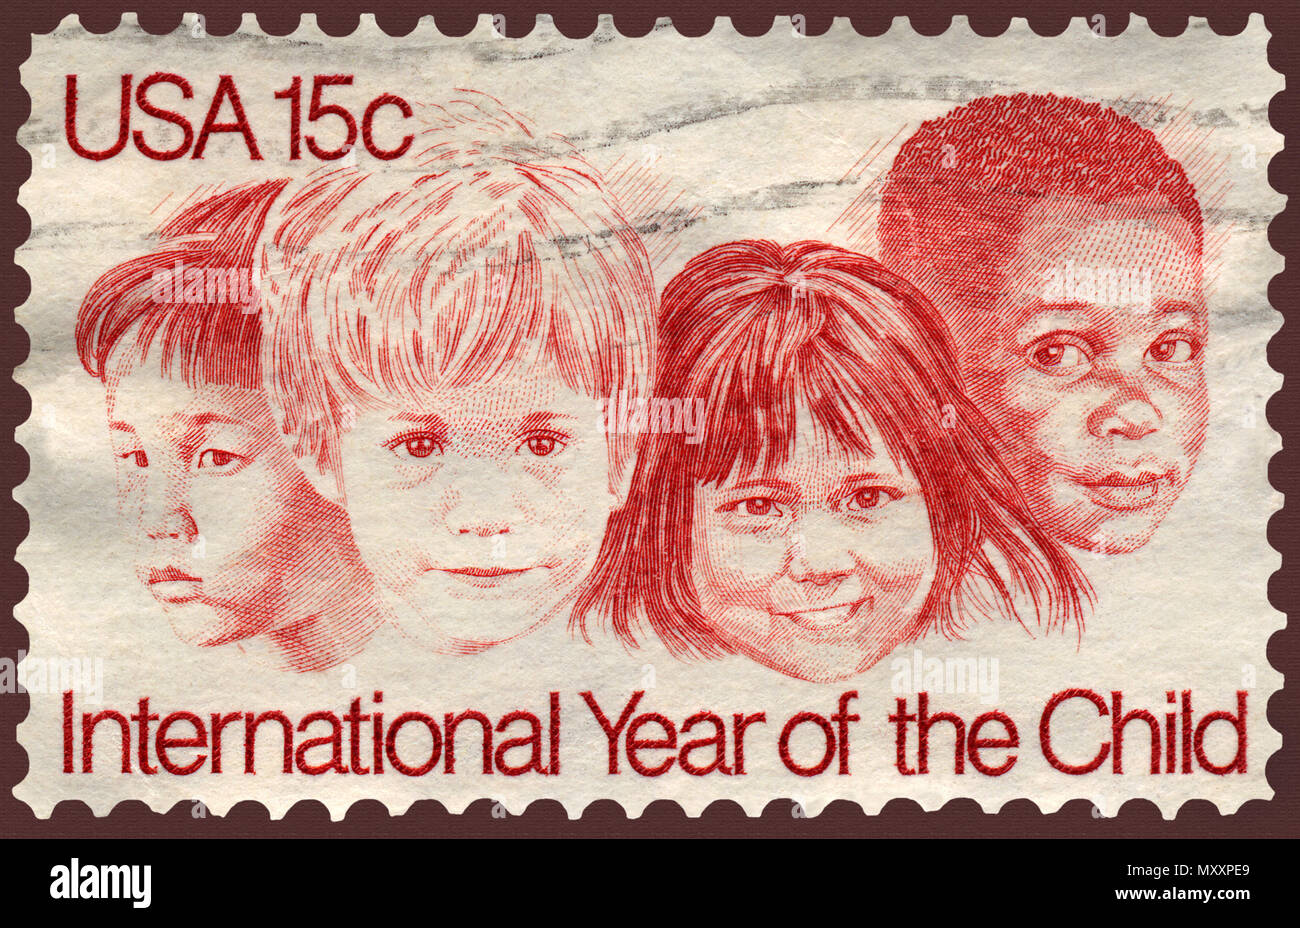 International Year of the Child Postage Stamp Stock Photo